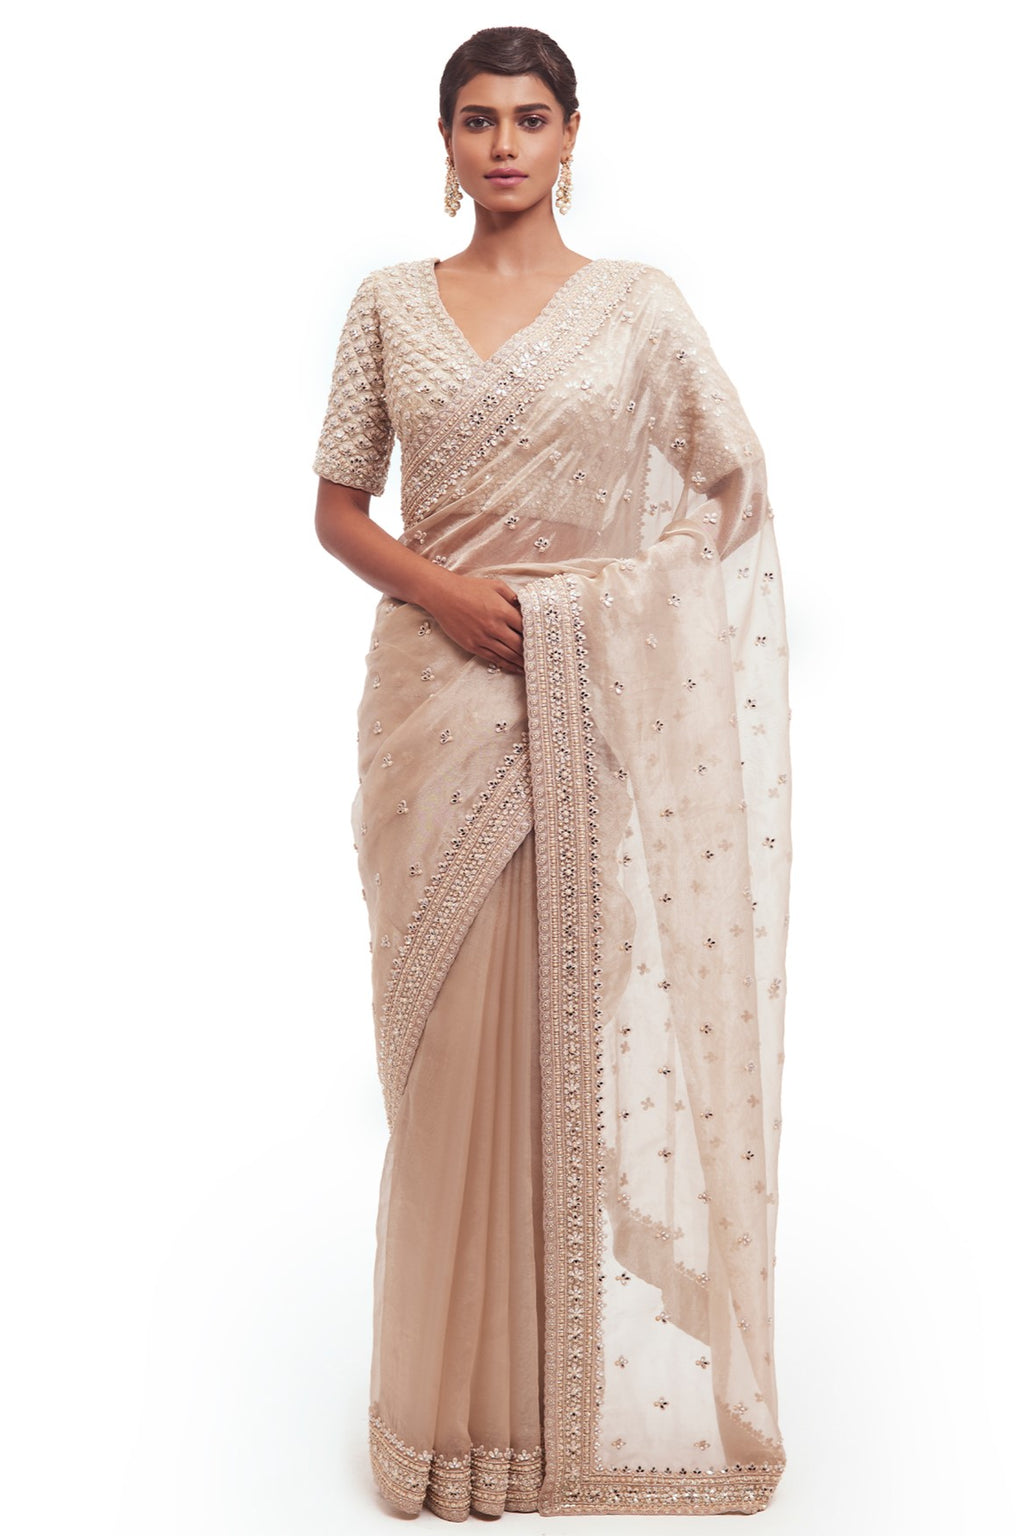 Buy beautiful dusty white tissue saree online in USA with embroidered saree blouse. Look your best at parties and weddings in beautiful designer sarees, embroidered sarees, handwoven sarees, silk sarees, organza saris from Pure Elegance Indian saree store in USA.-full view